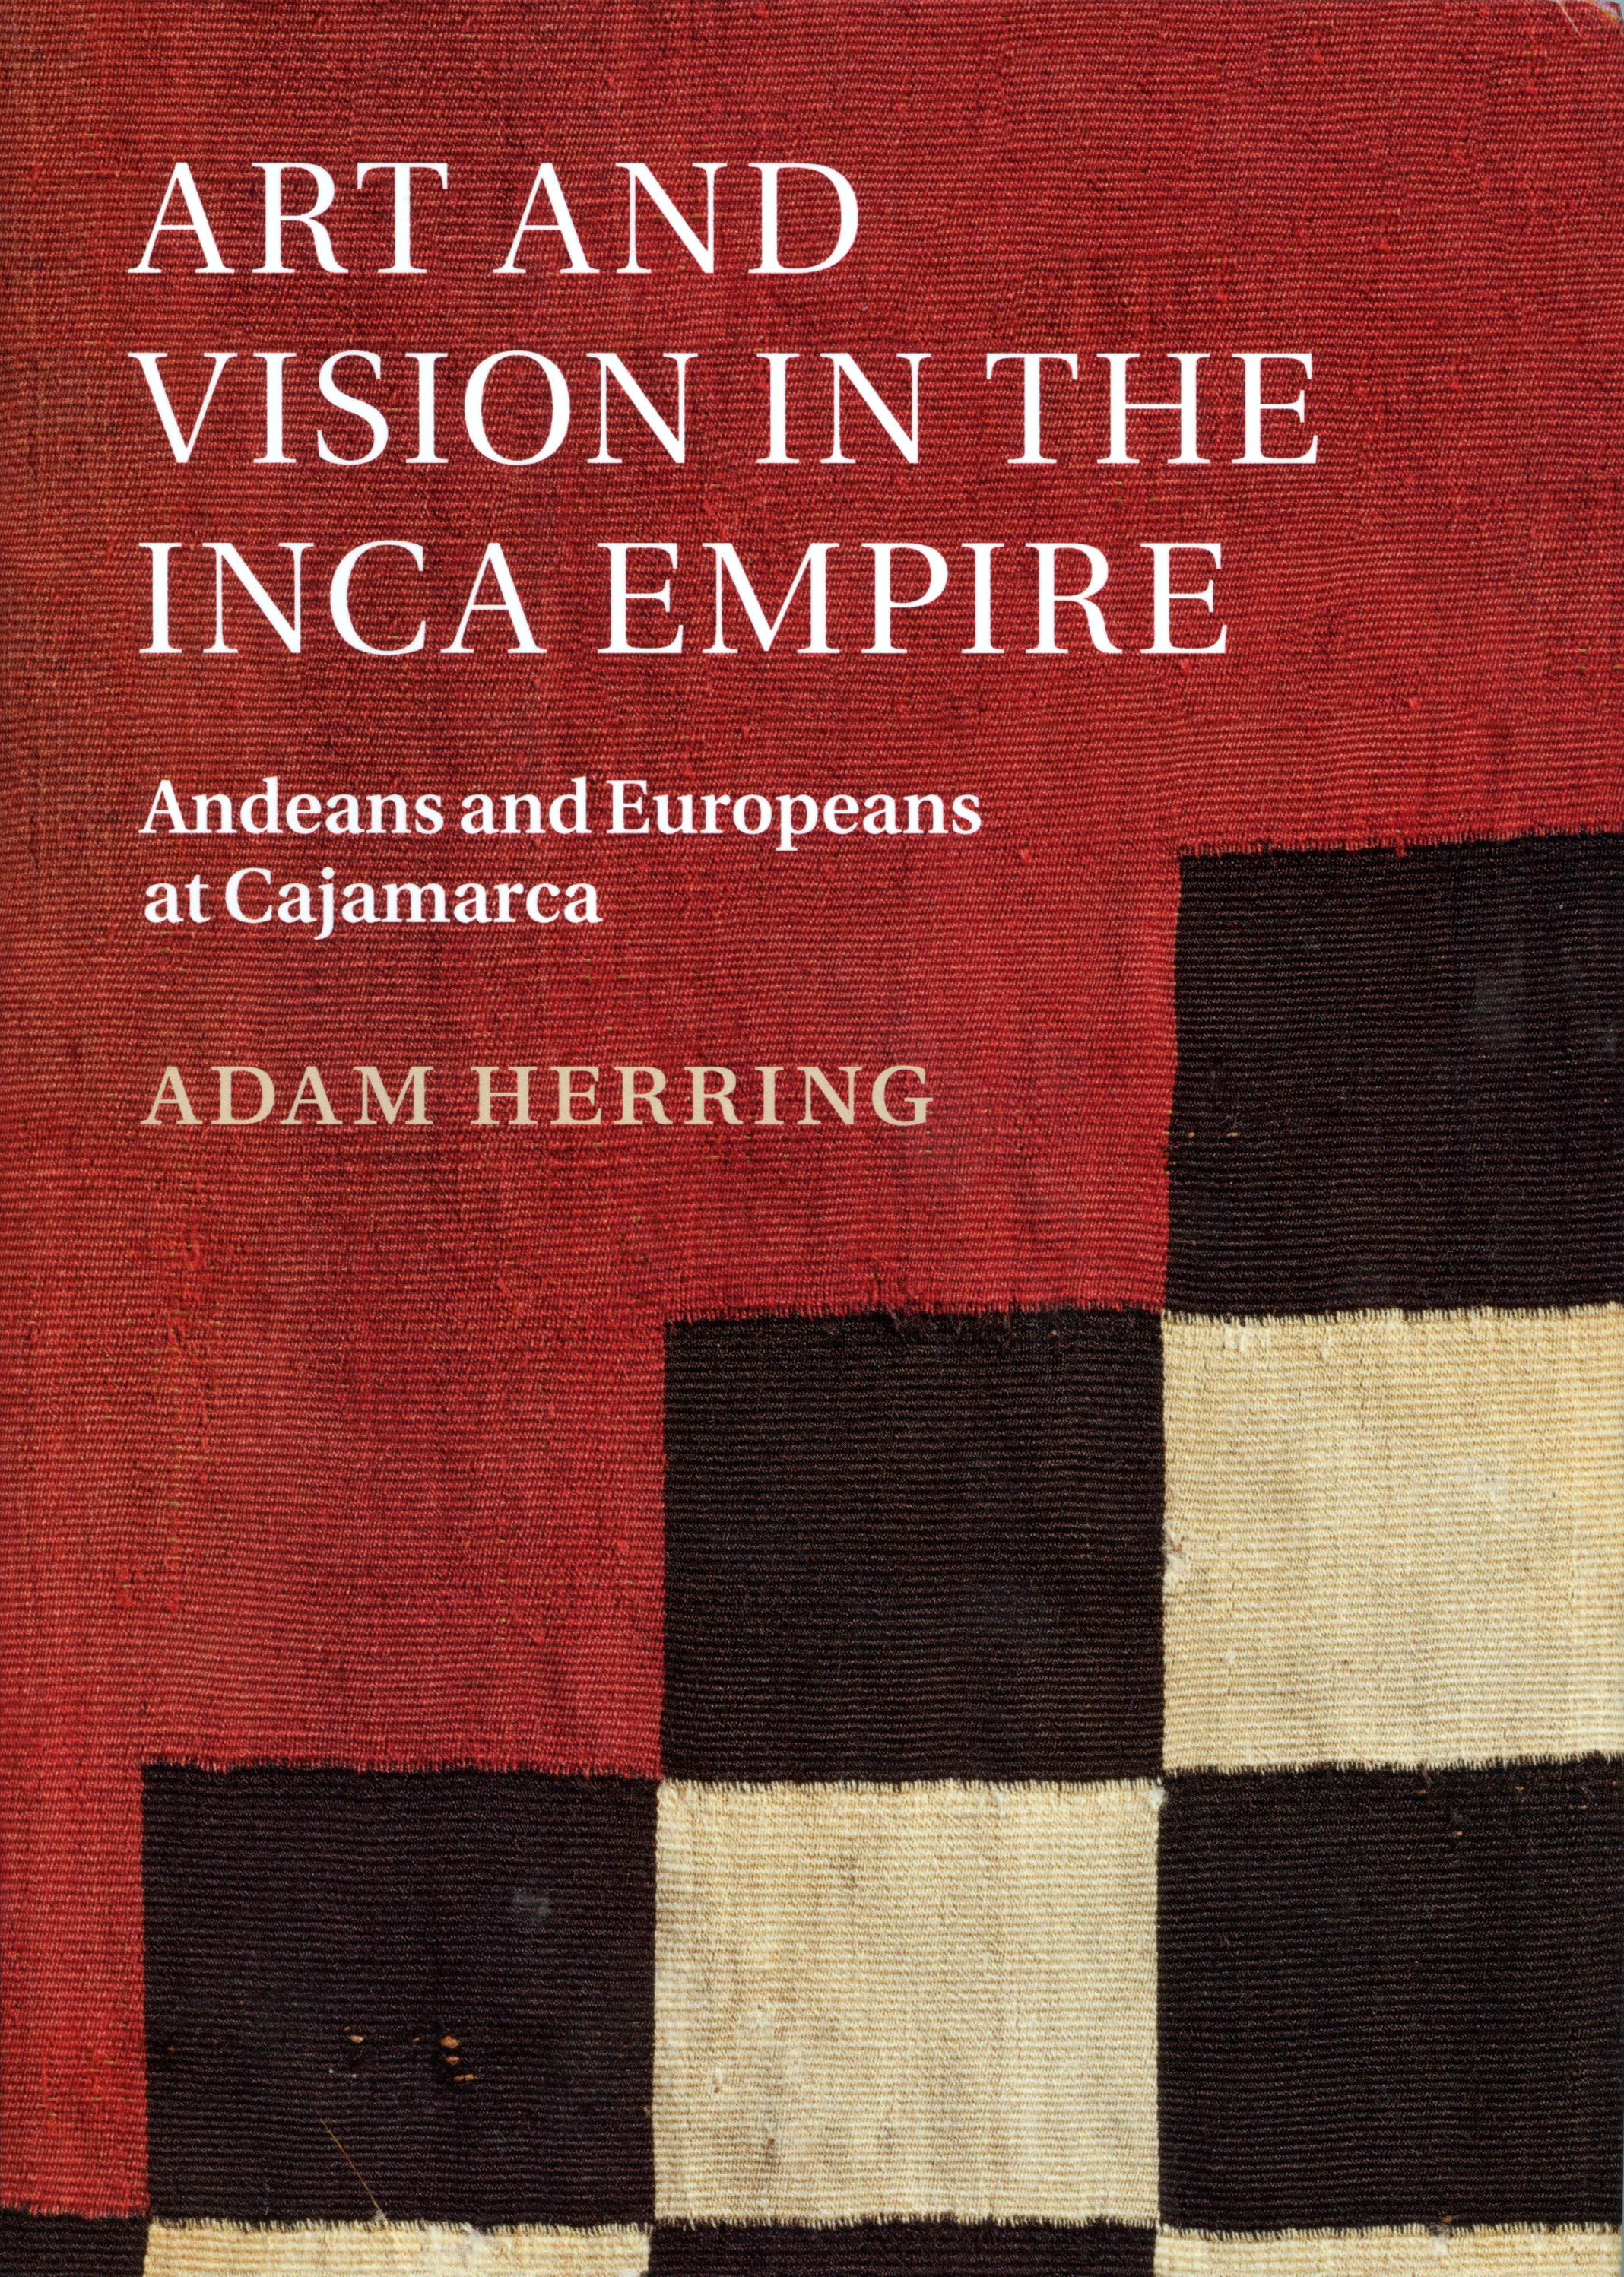 Art and Vision in the Inca Empire by Adam Herring